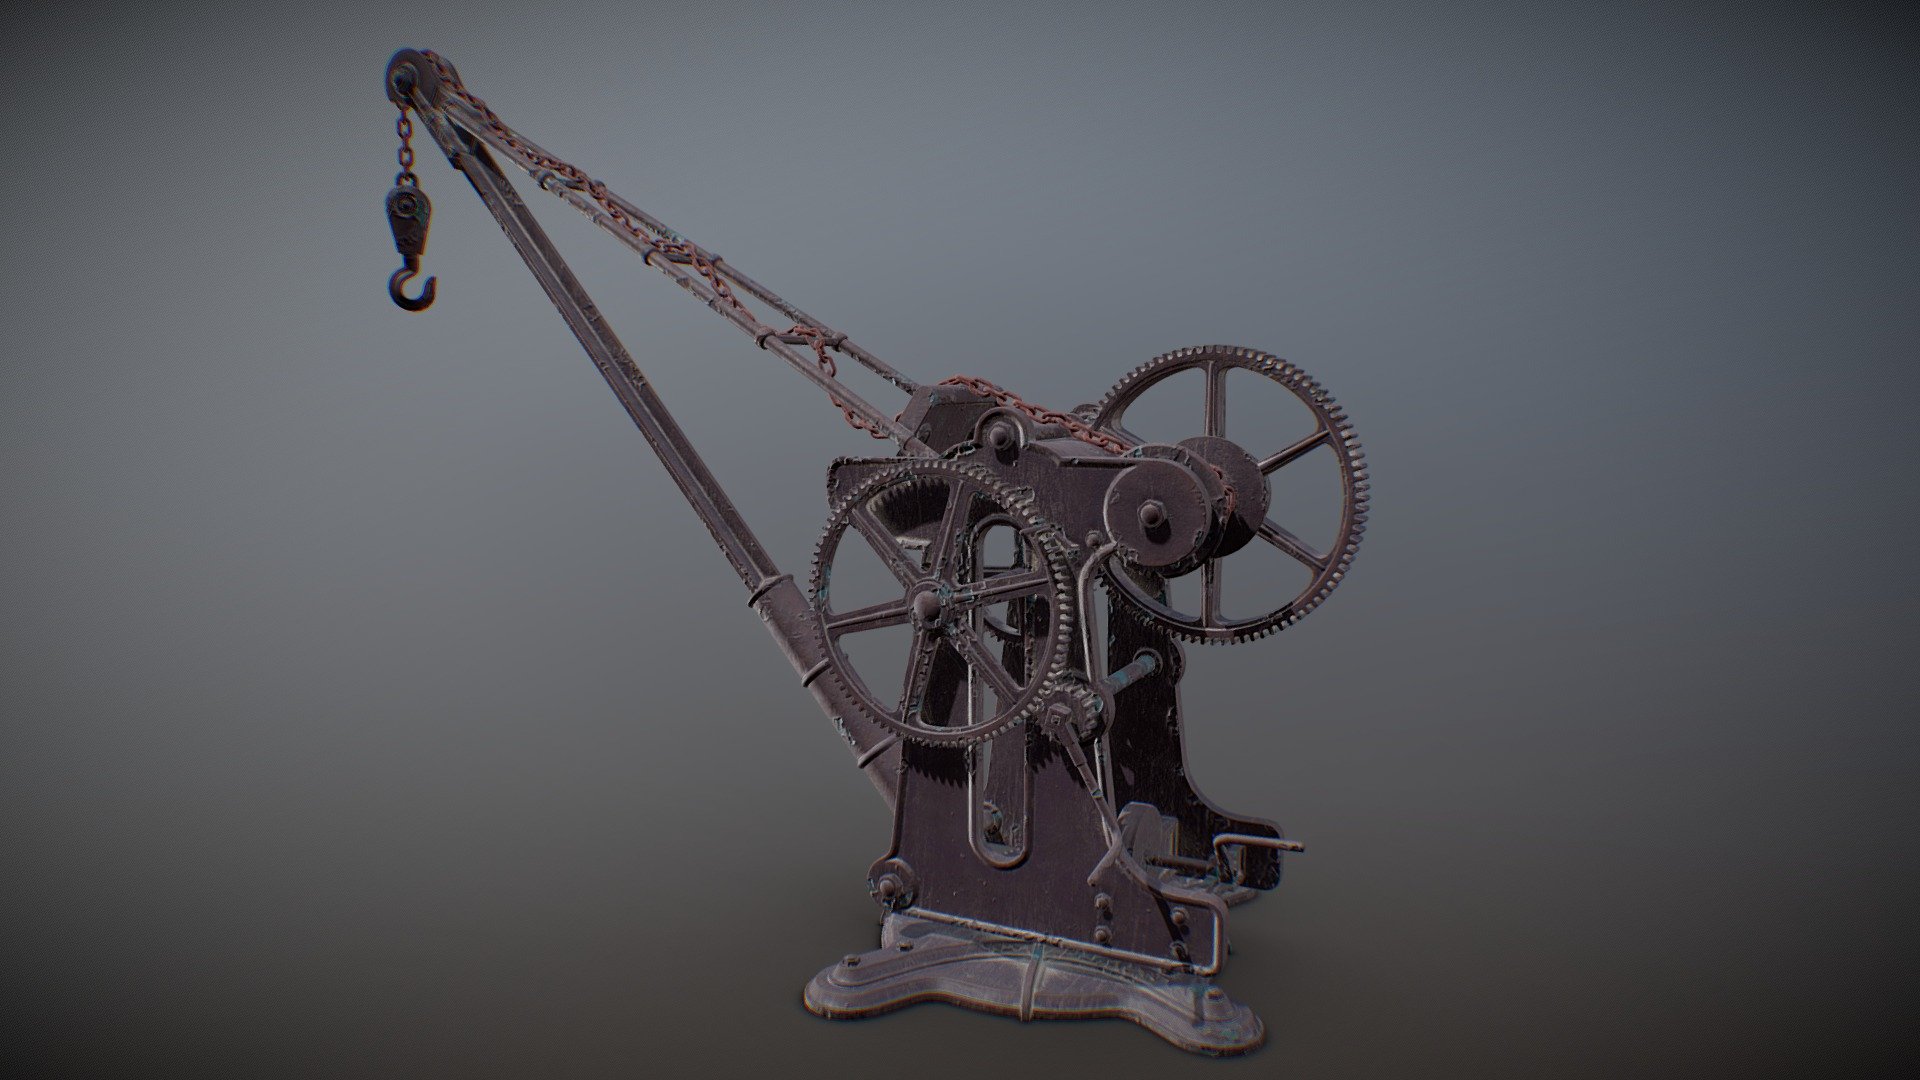 To purchase and more models: 
https://www.artstation.com/marketplace/p/a1MRq/victorian-manual-crane?utm_source=artstation&amp;utm_medium=referral&amp;utm_campaign=homepage&amp;utm_term=marketplace

High poly 3D model with bevels- no subdivision needed.

68046 polygons 

PBR textures, 4096X4096.

Fairly detailed for close shots.

Not to be used for any AI training/other use 3d model